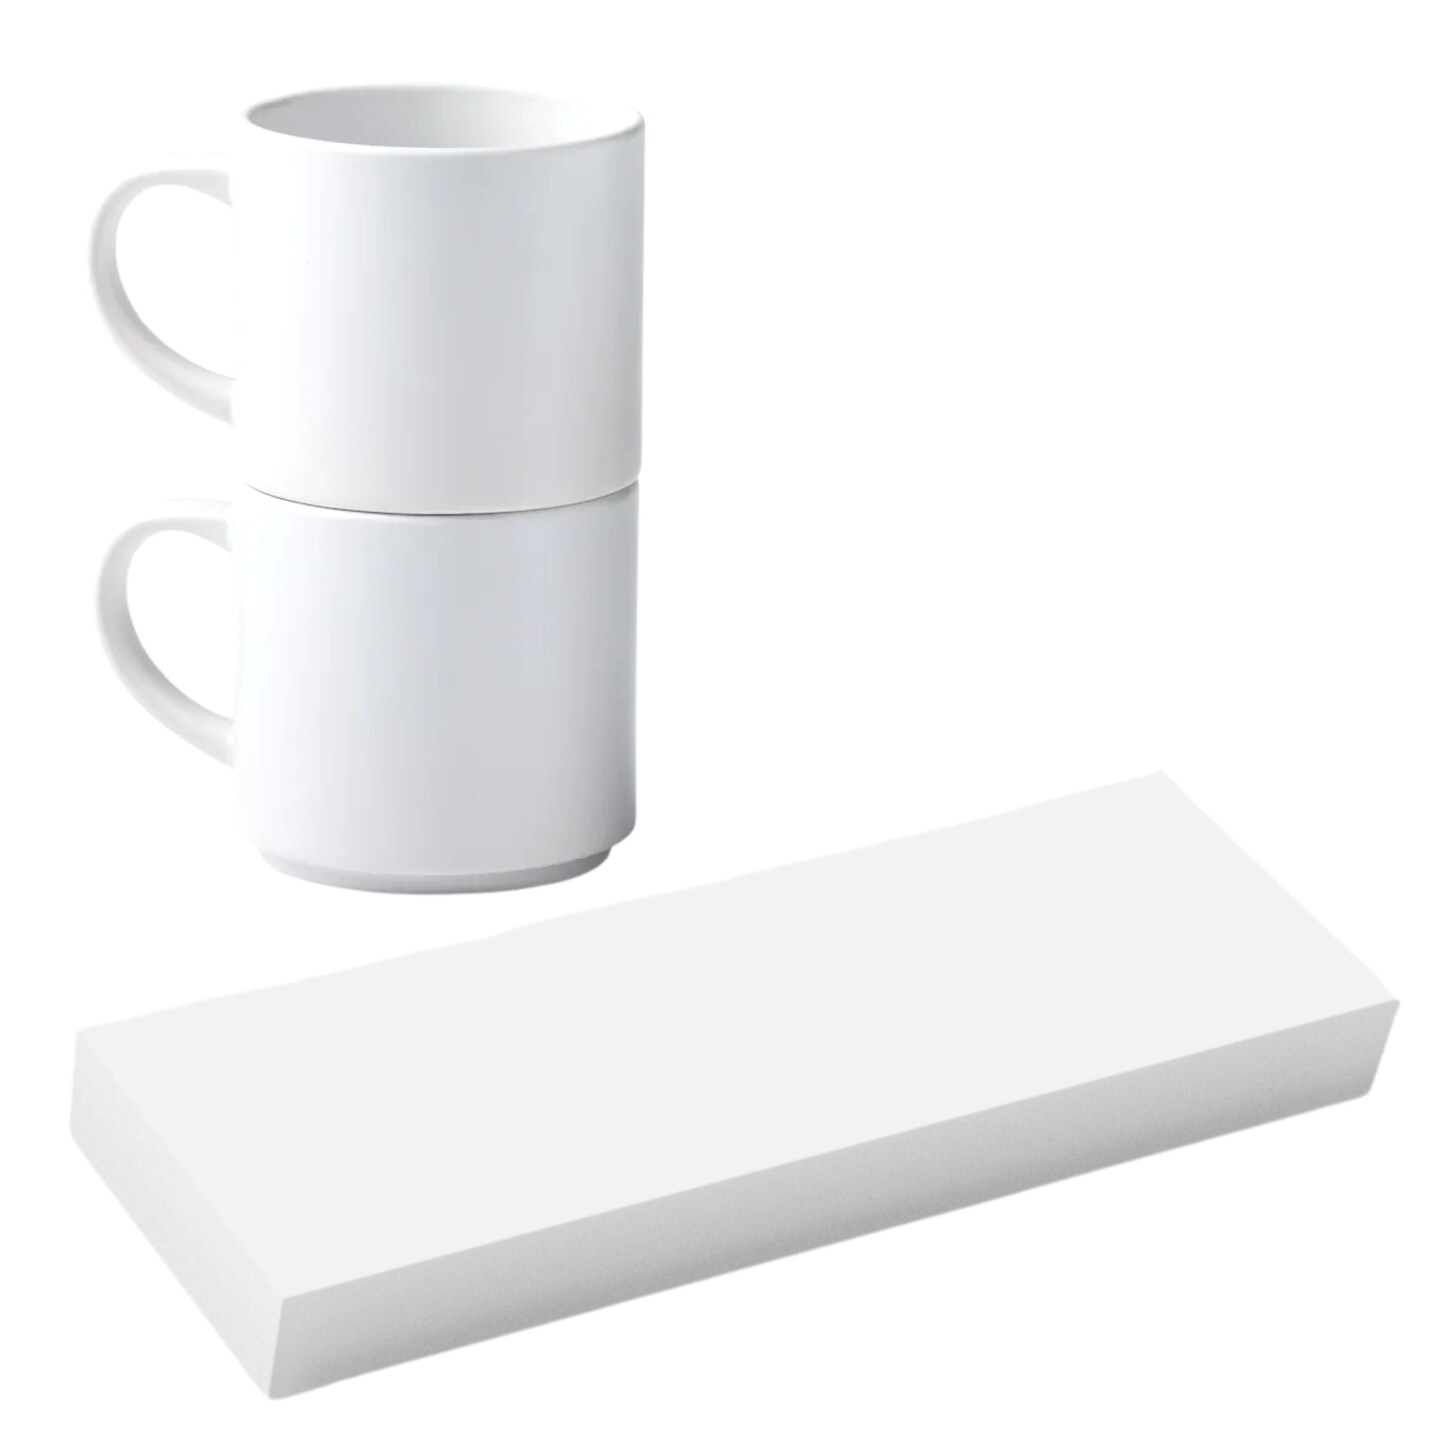 Precut Butcher Paper Sheets, Fits 10 oz Stackable Sublimation Mugs Perfectly (10 in x 3 in), White, Uncoated